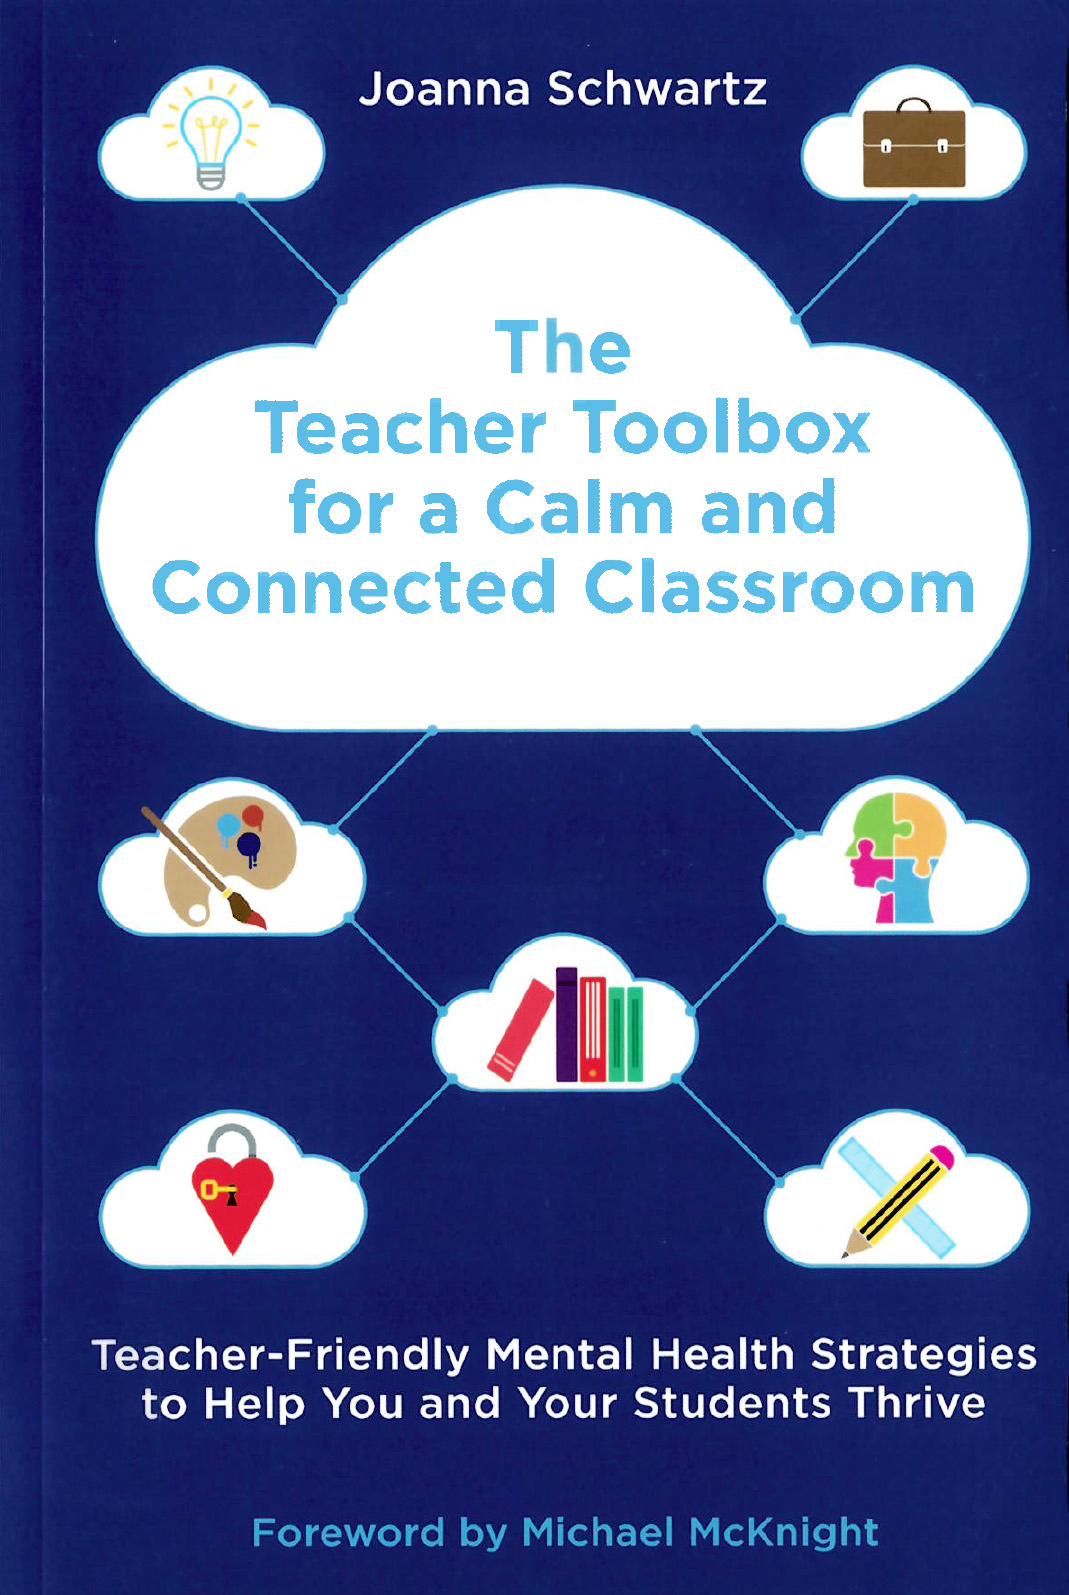 A book cover that is navy blue featuring icons in clouds and the title of the book, "The Teacher Toolbox for a Calm and Connected Classroom"